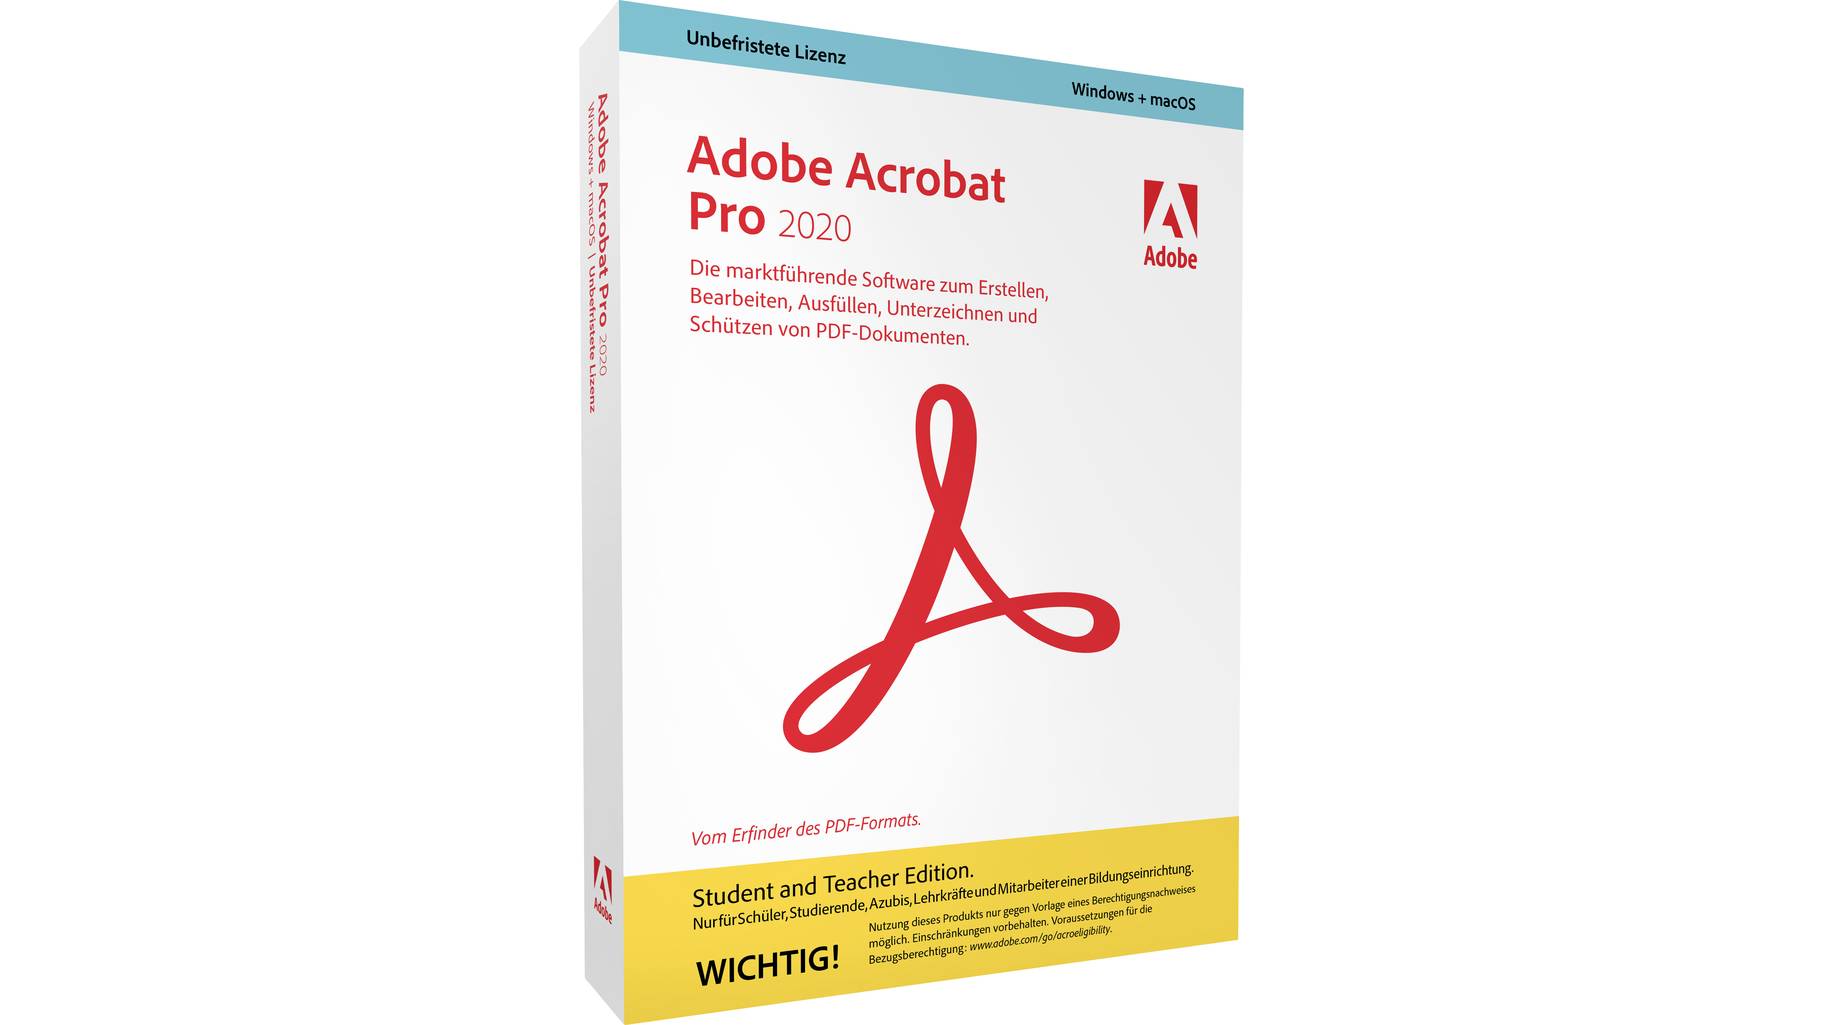 adobe acrobat pro dc student and teacher edition download link